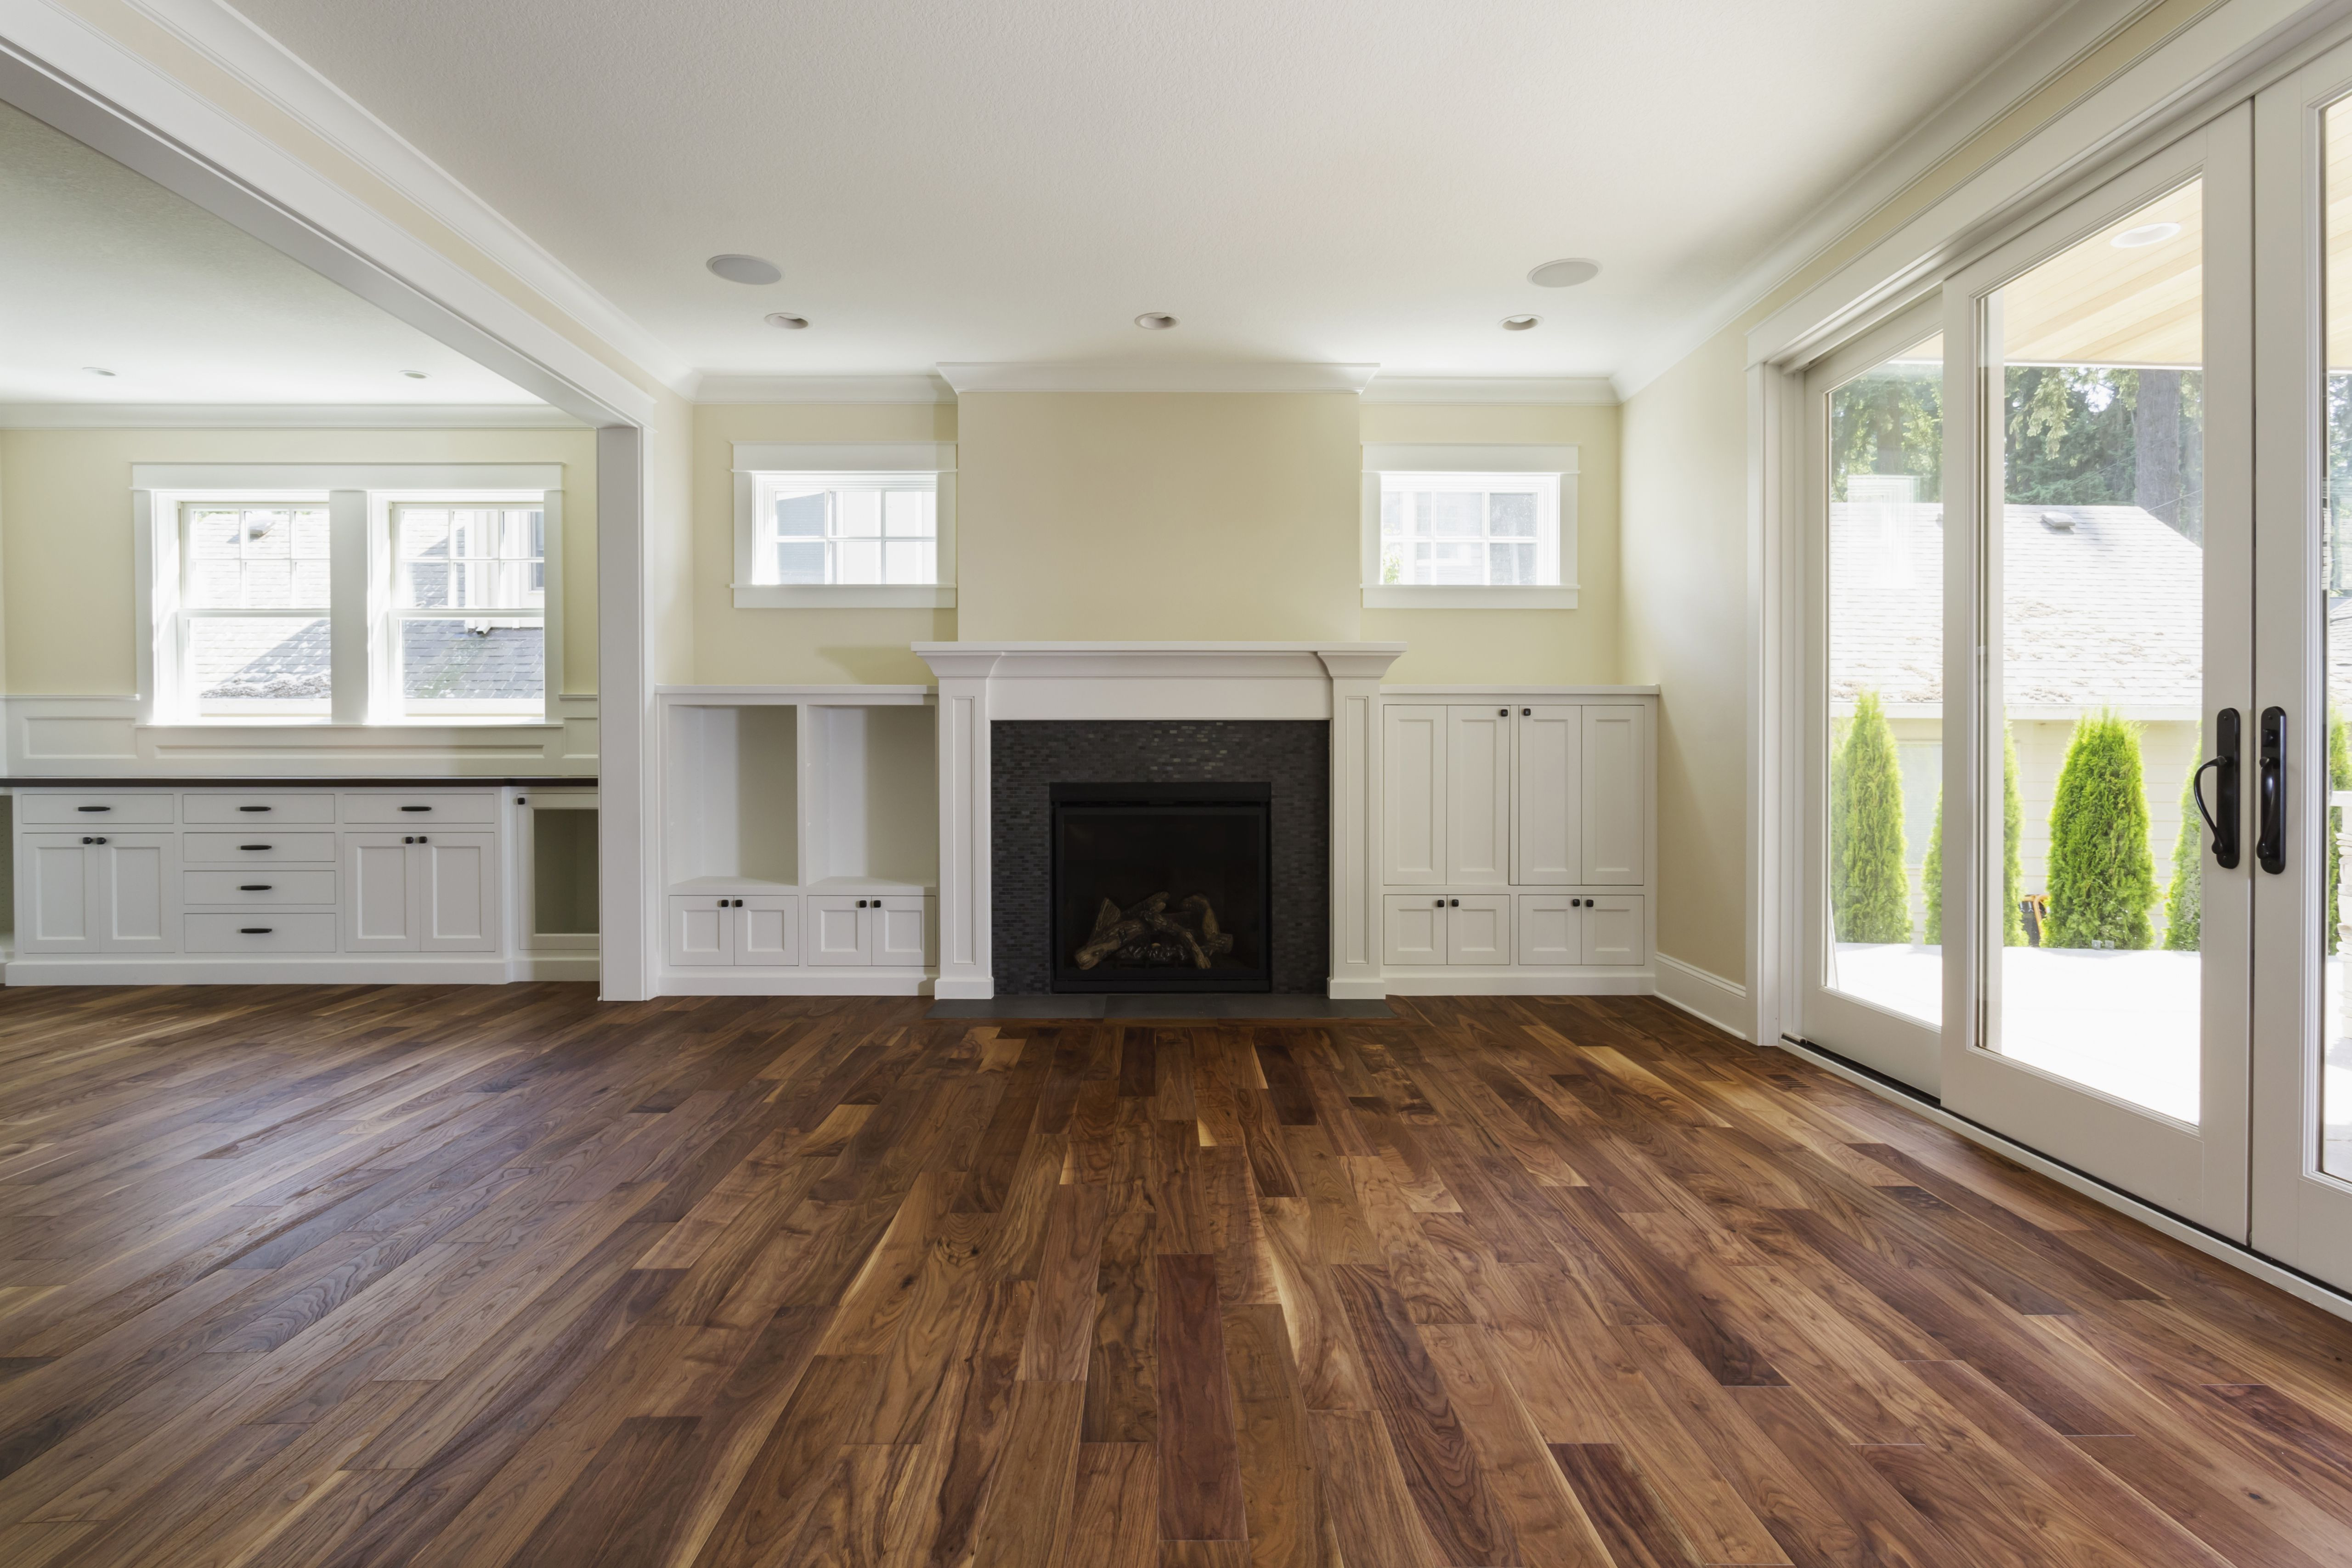 22 Awesome Wide Plank Grey Hardwood Flooring 2024 free download wide plank grey hardwood flooring of the pros and cons of prefinished hardwood flooring pertaining to fireplace and built in shelves in living room 482143011 57bef8e33df78cc16e035397